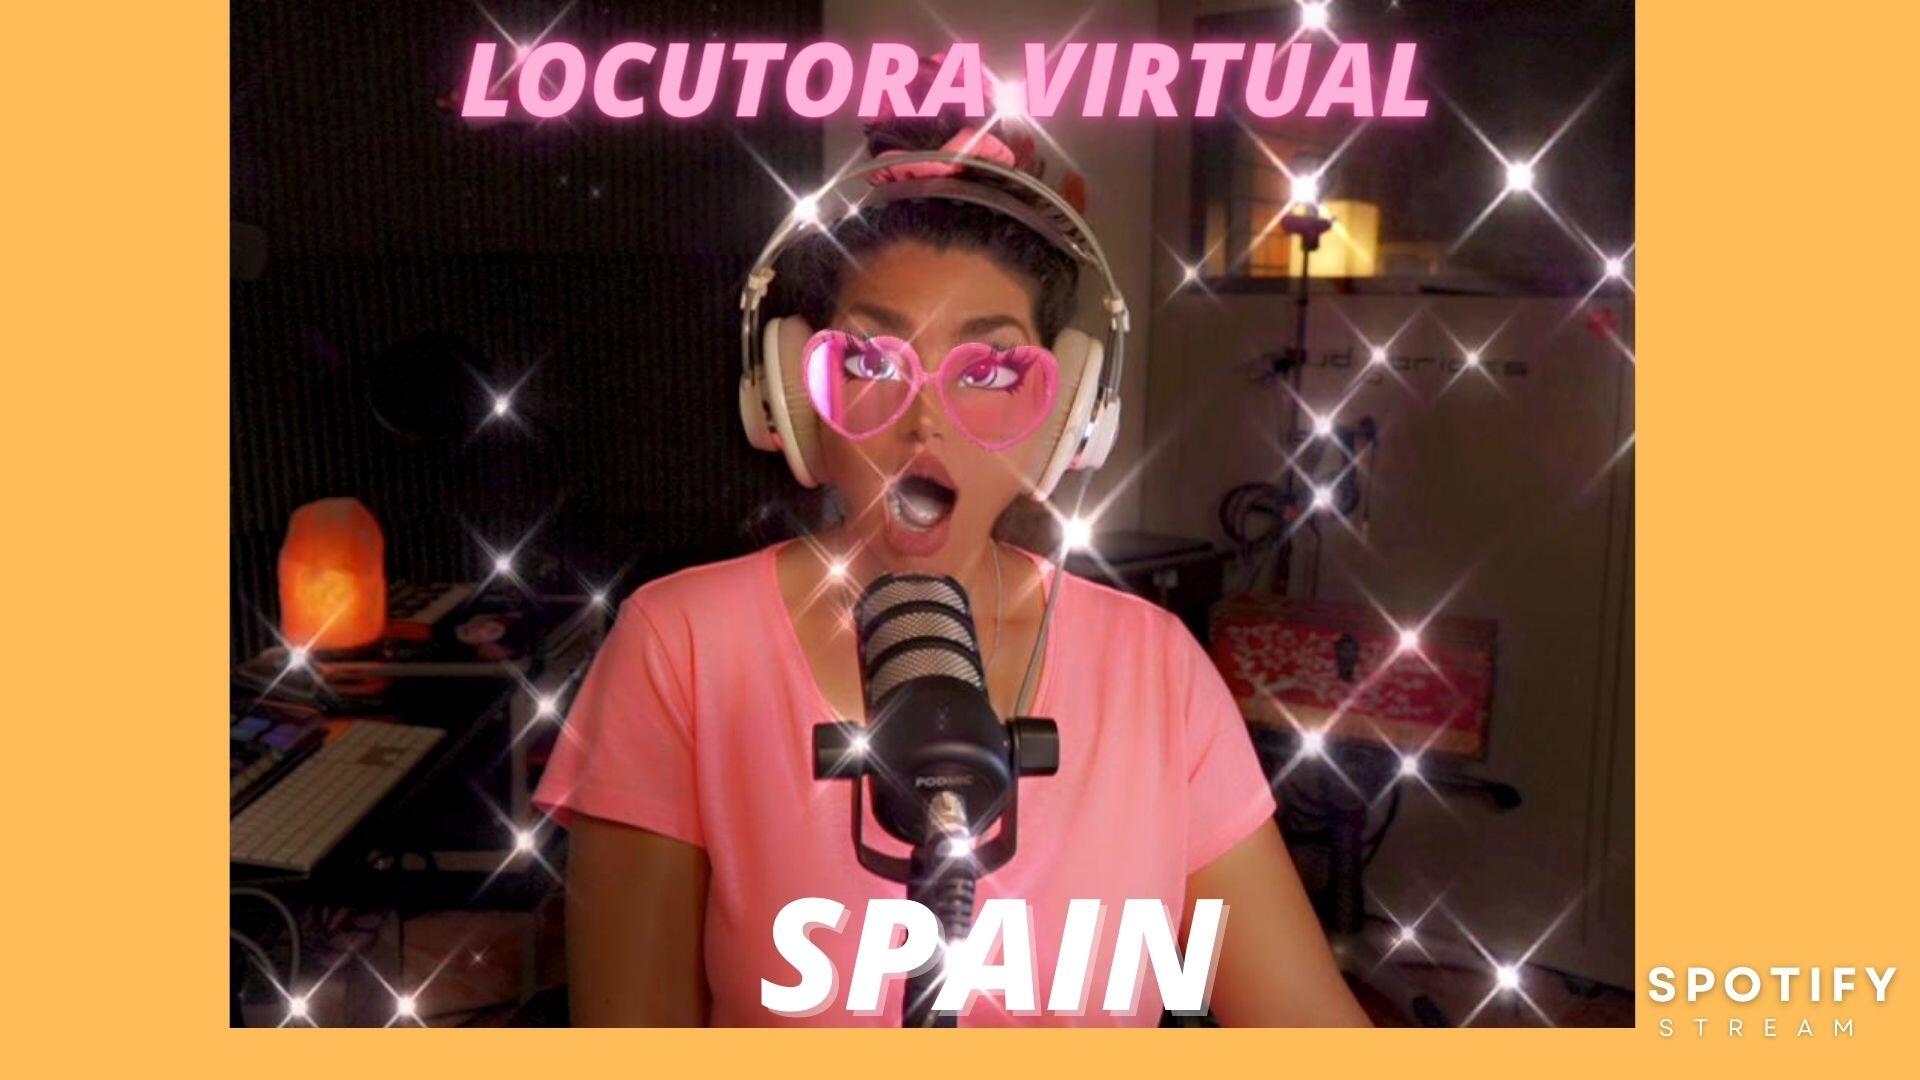 A Virtual Spanish Voice to bring your project to life?